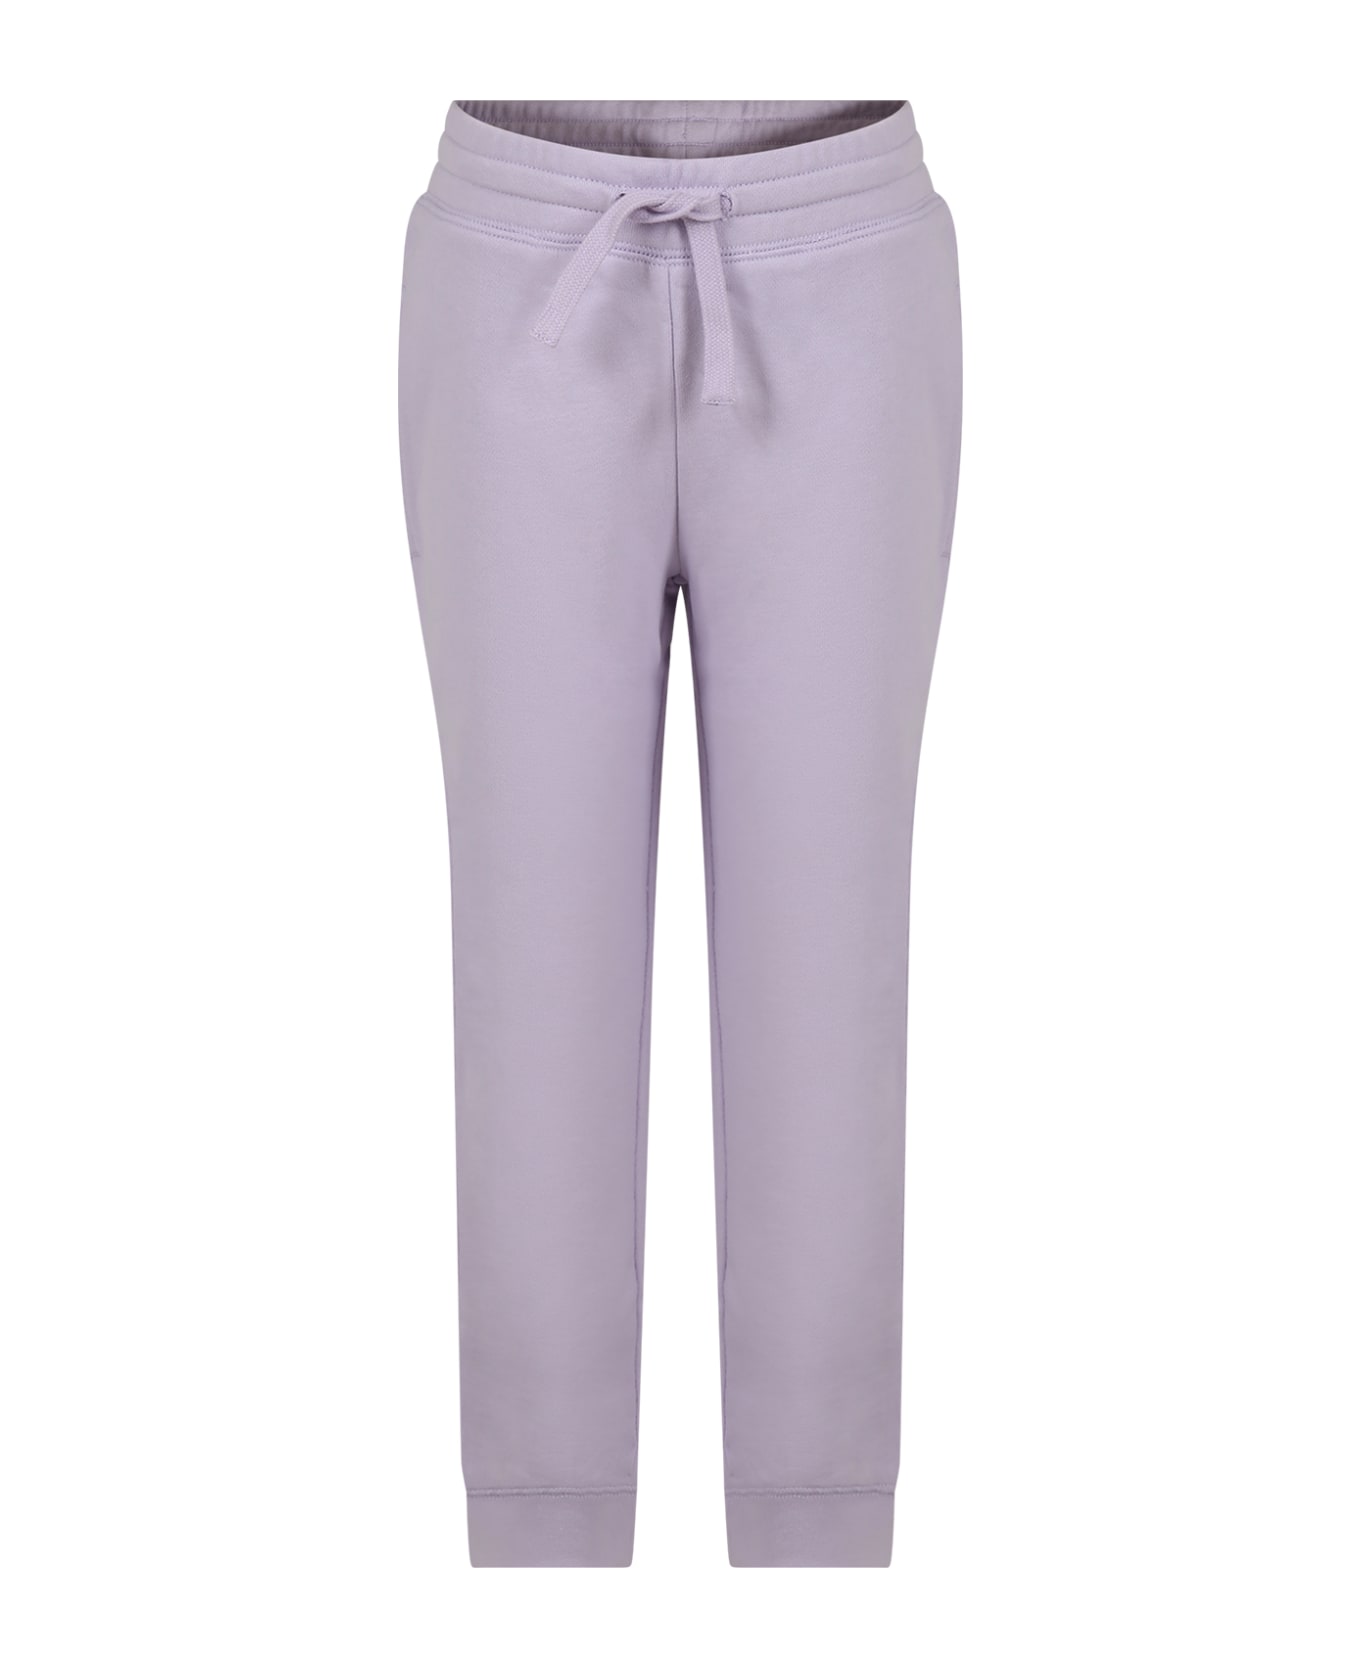 Stella McCartney Kids Purple Trousers For Girl With Logo - Violet